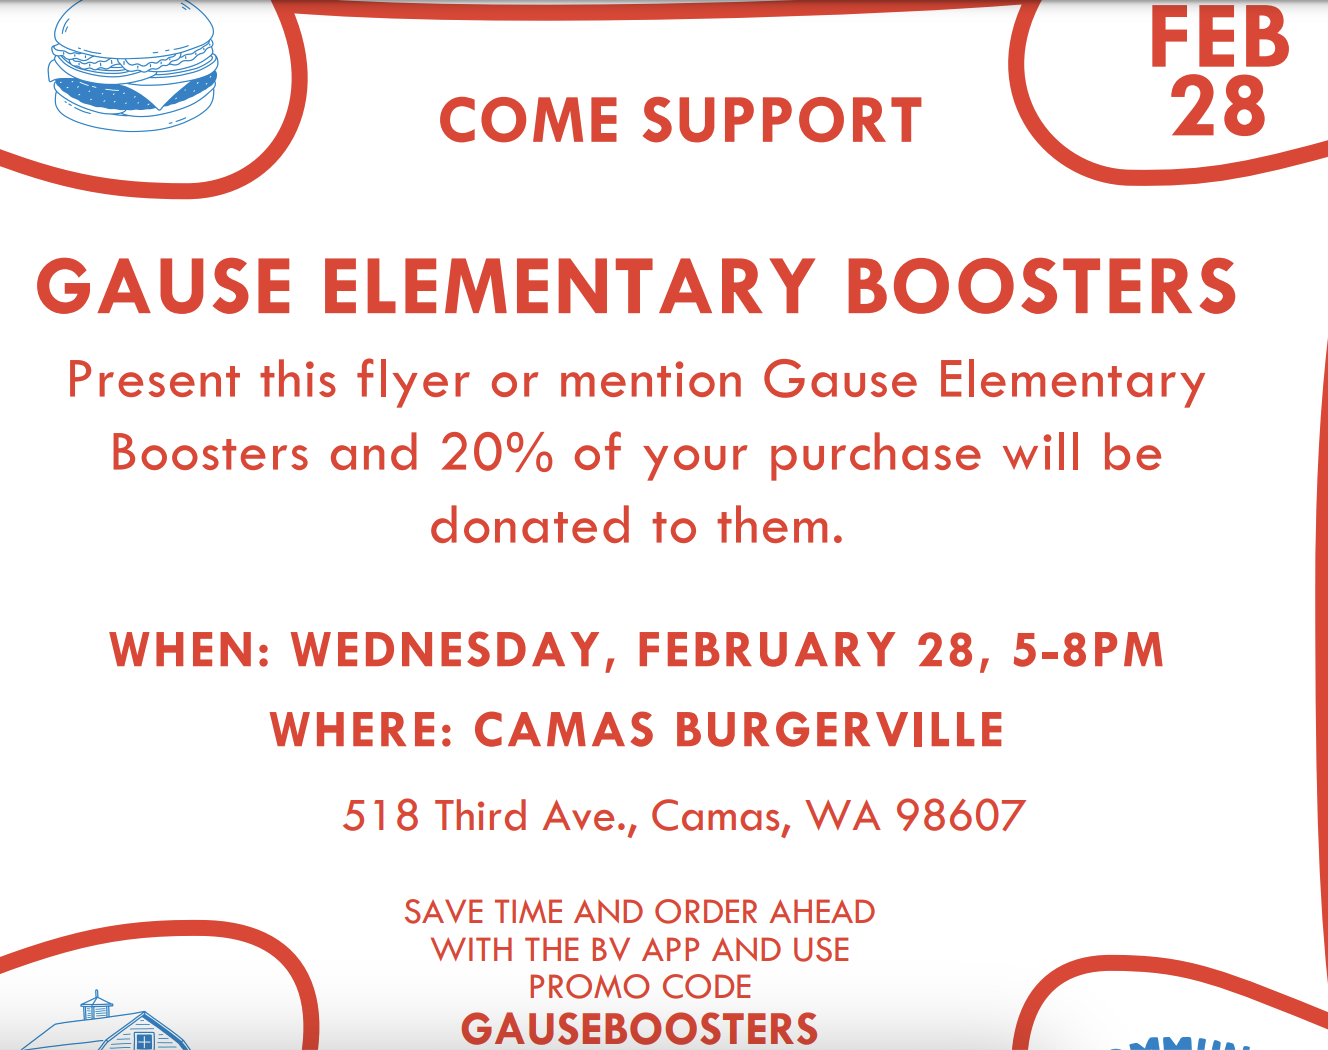 Announcement of Gause Elementary Boosters Wed, Feb. 28 (5-8pm) fundraiser at the Camas Burgerville.